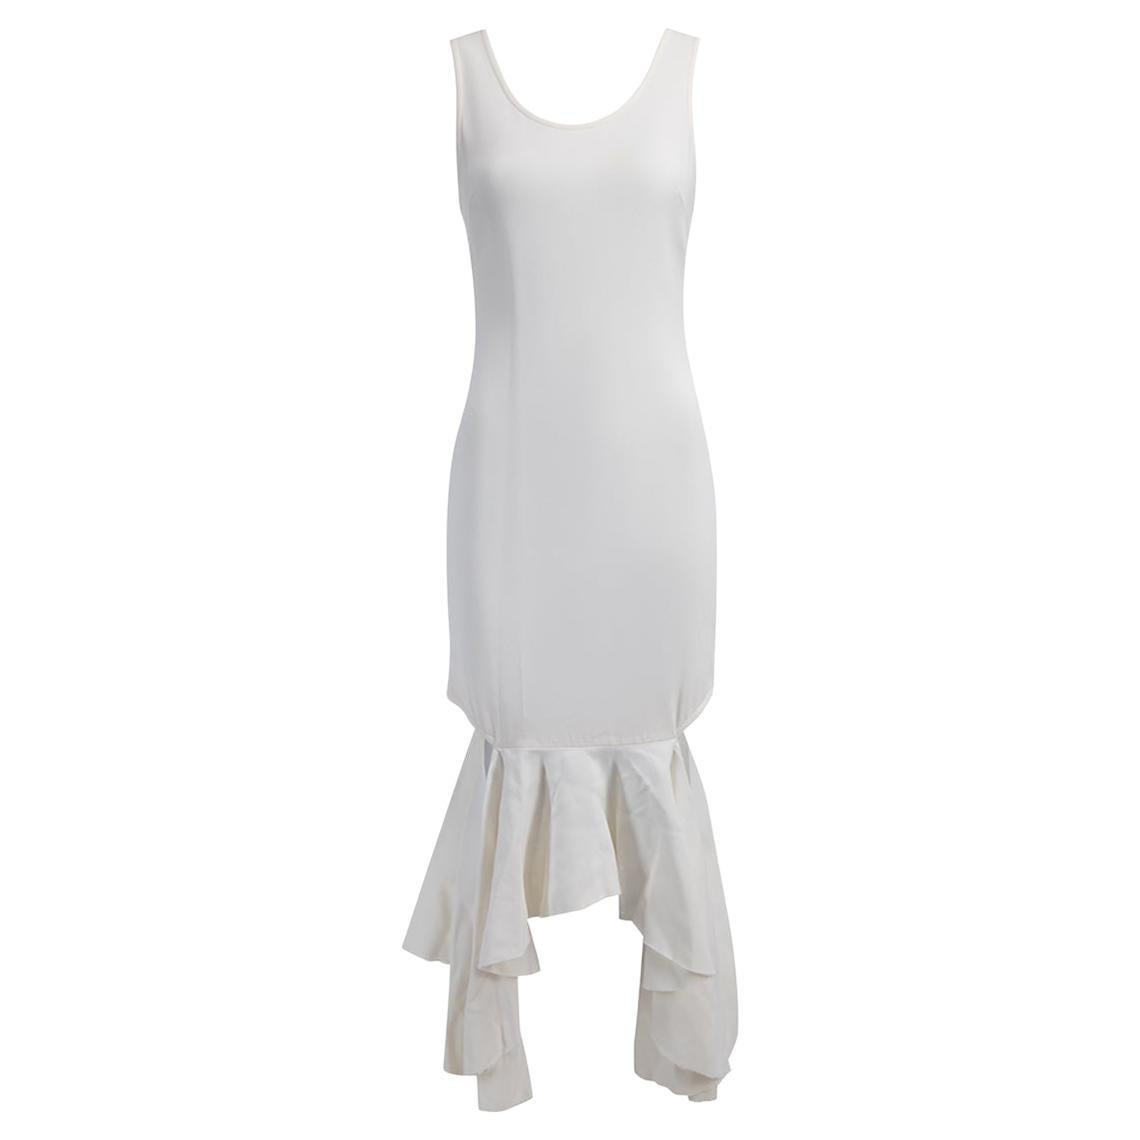 Pre-Loved Givenchy Women's White Drop Waist Cut Out Detail Knee Length Dress